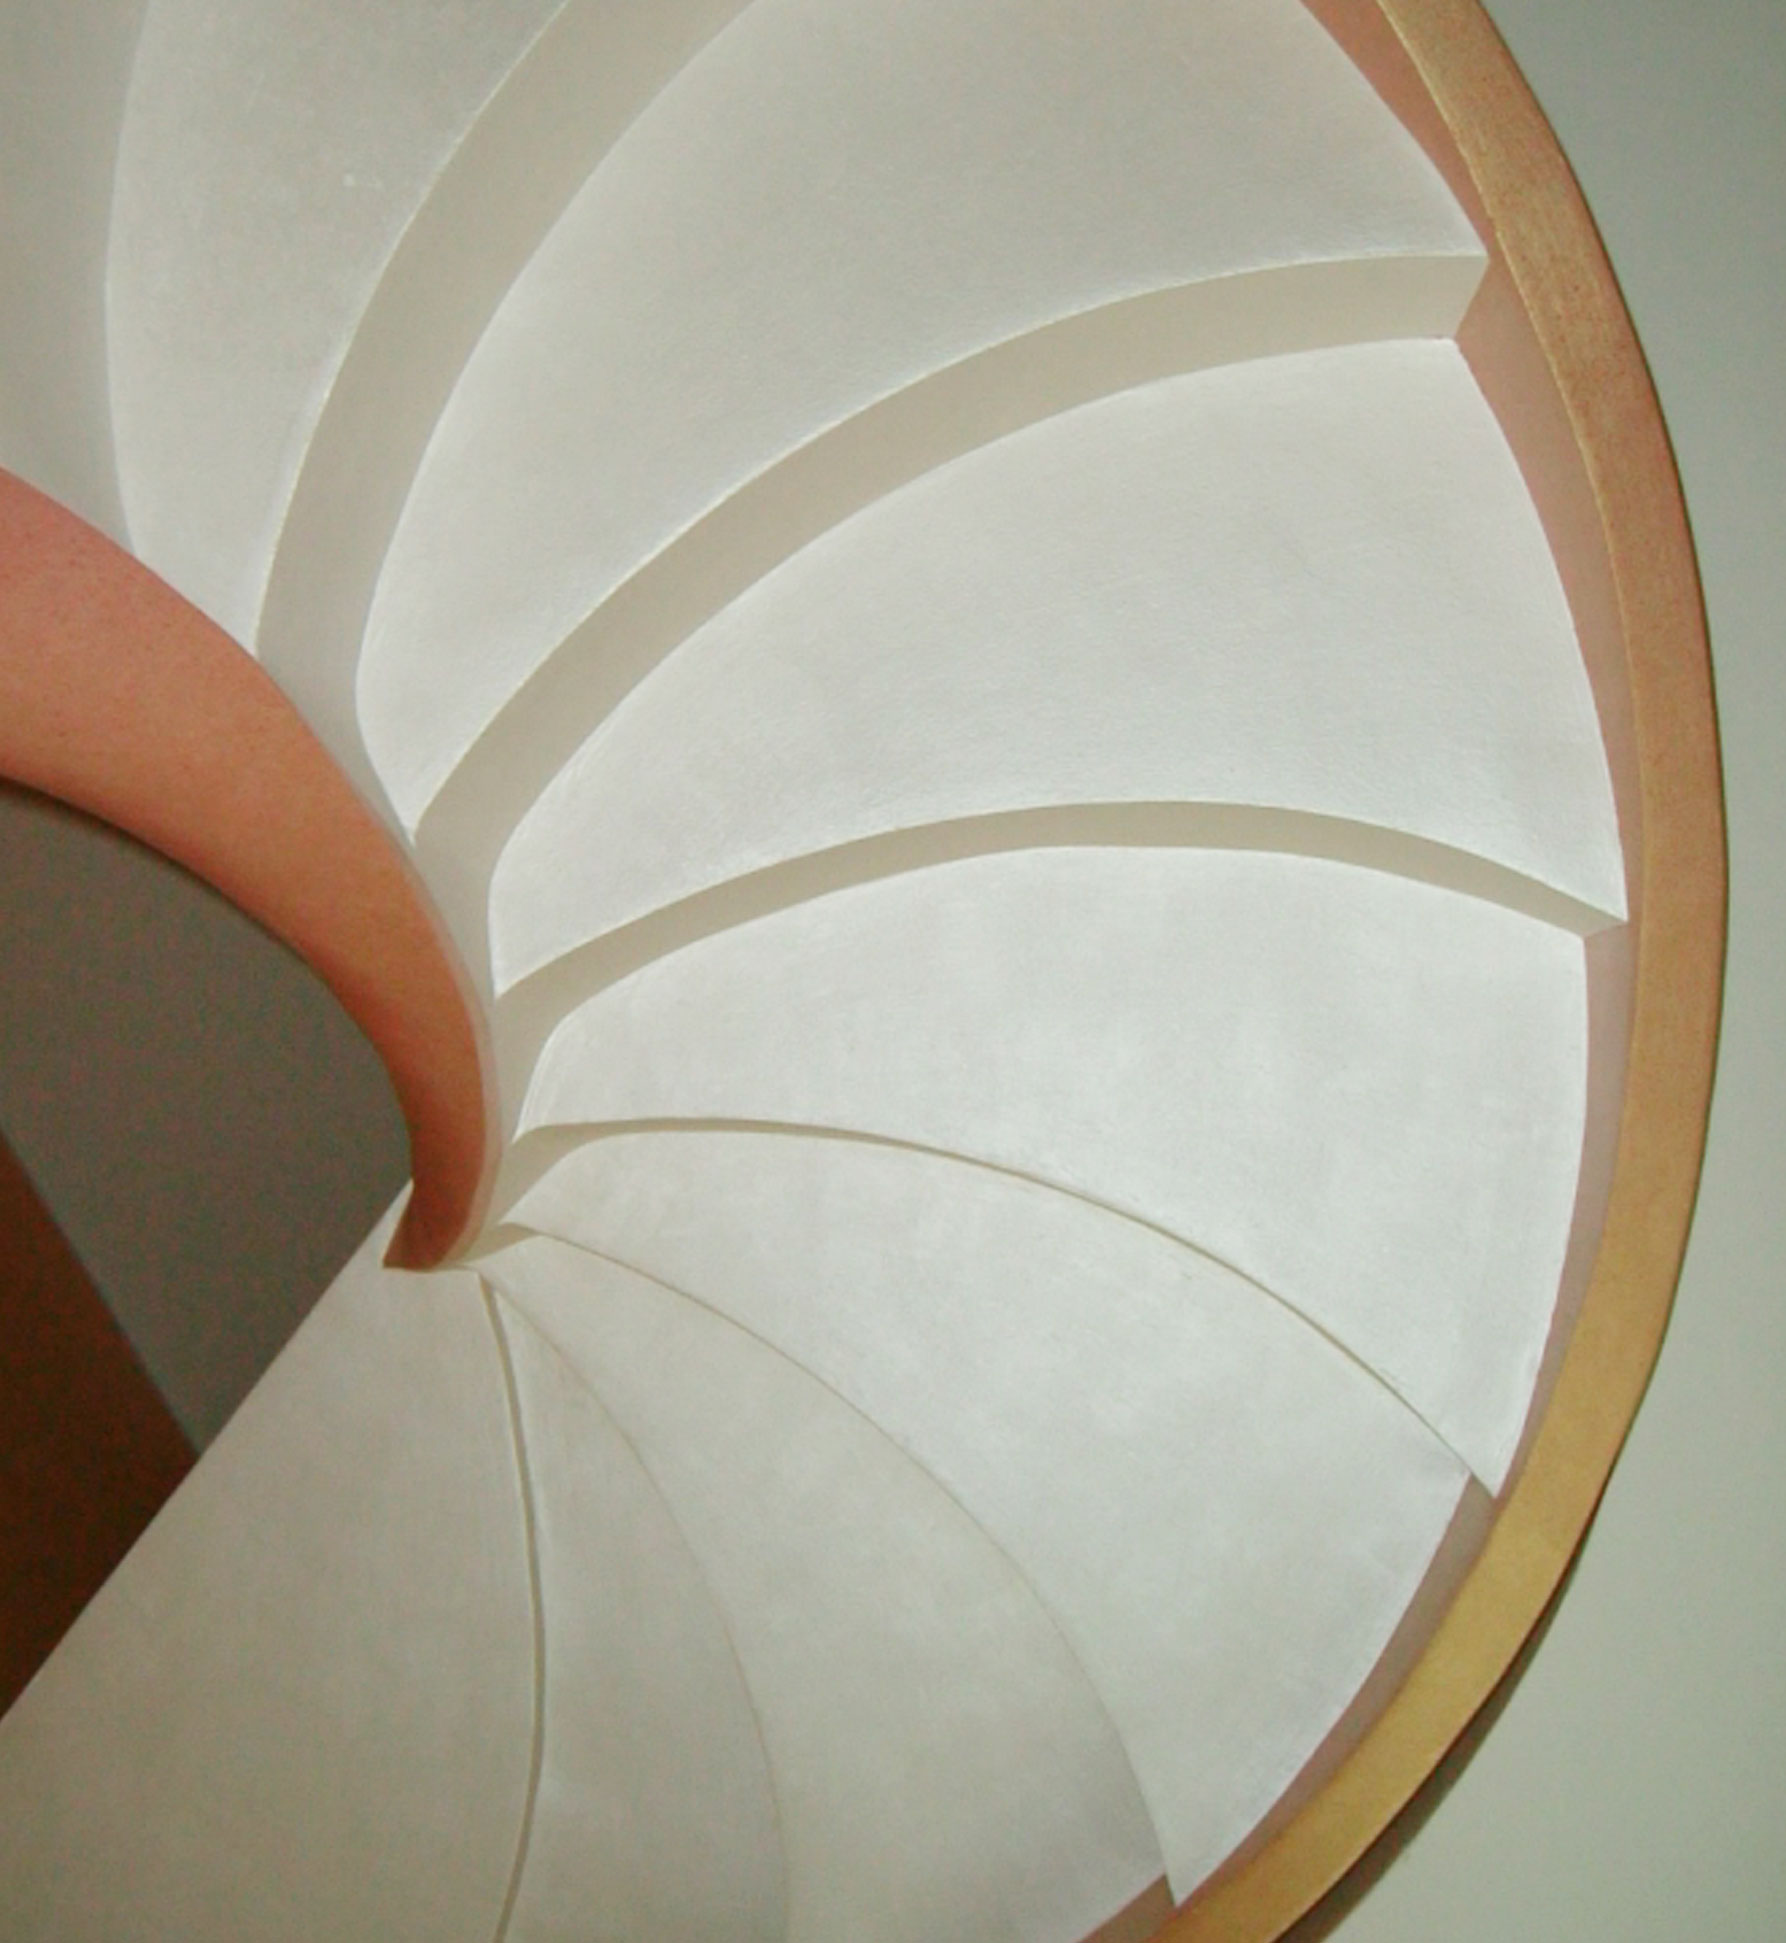 Cladding for helical staircases